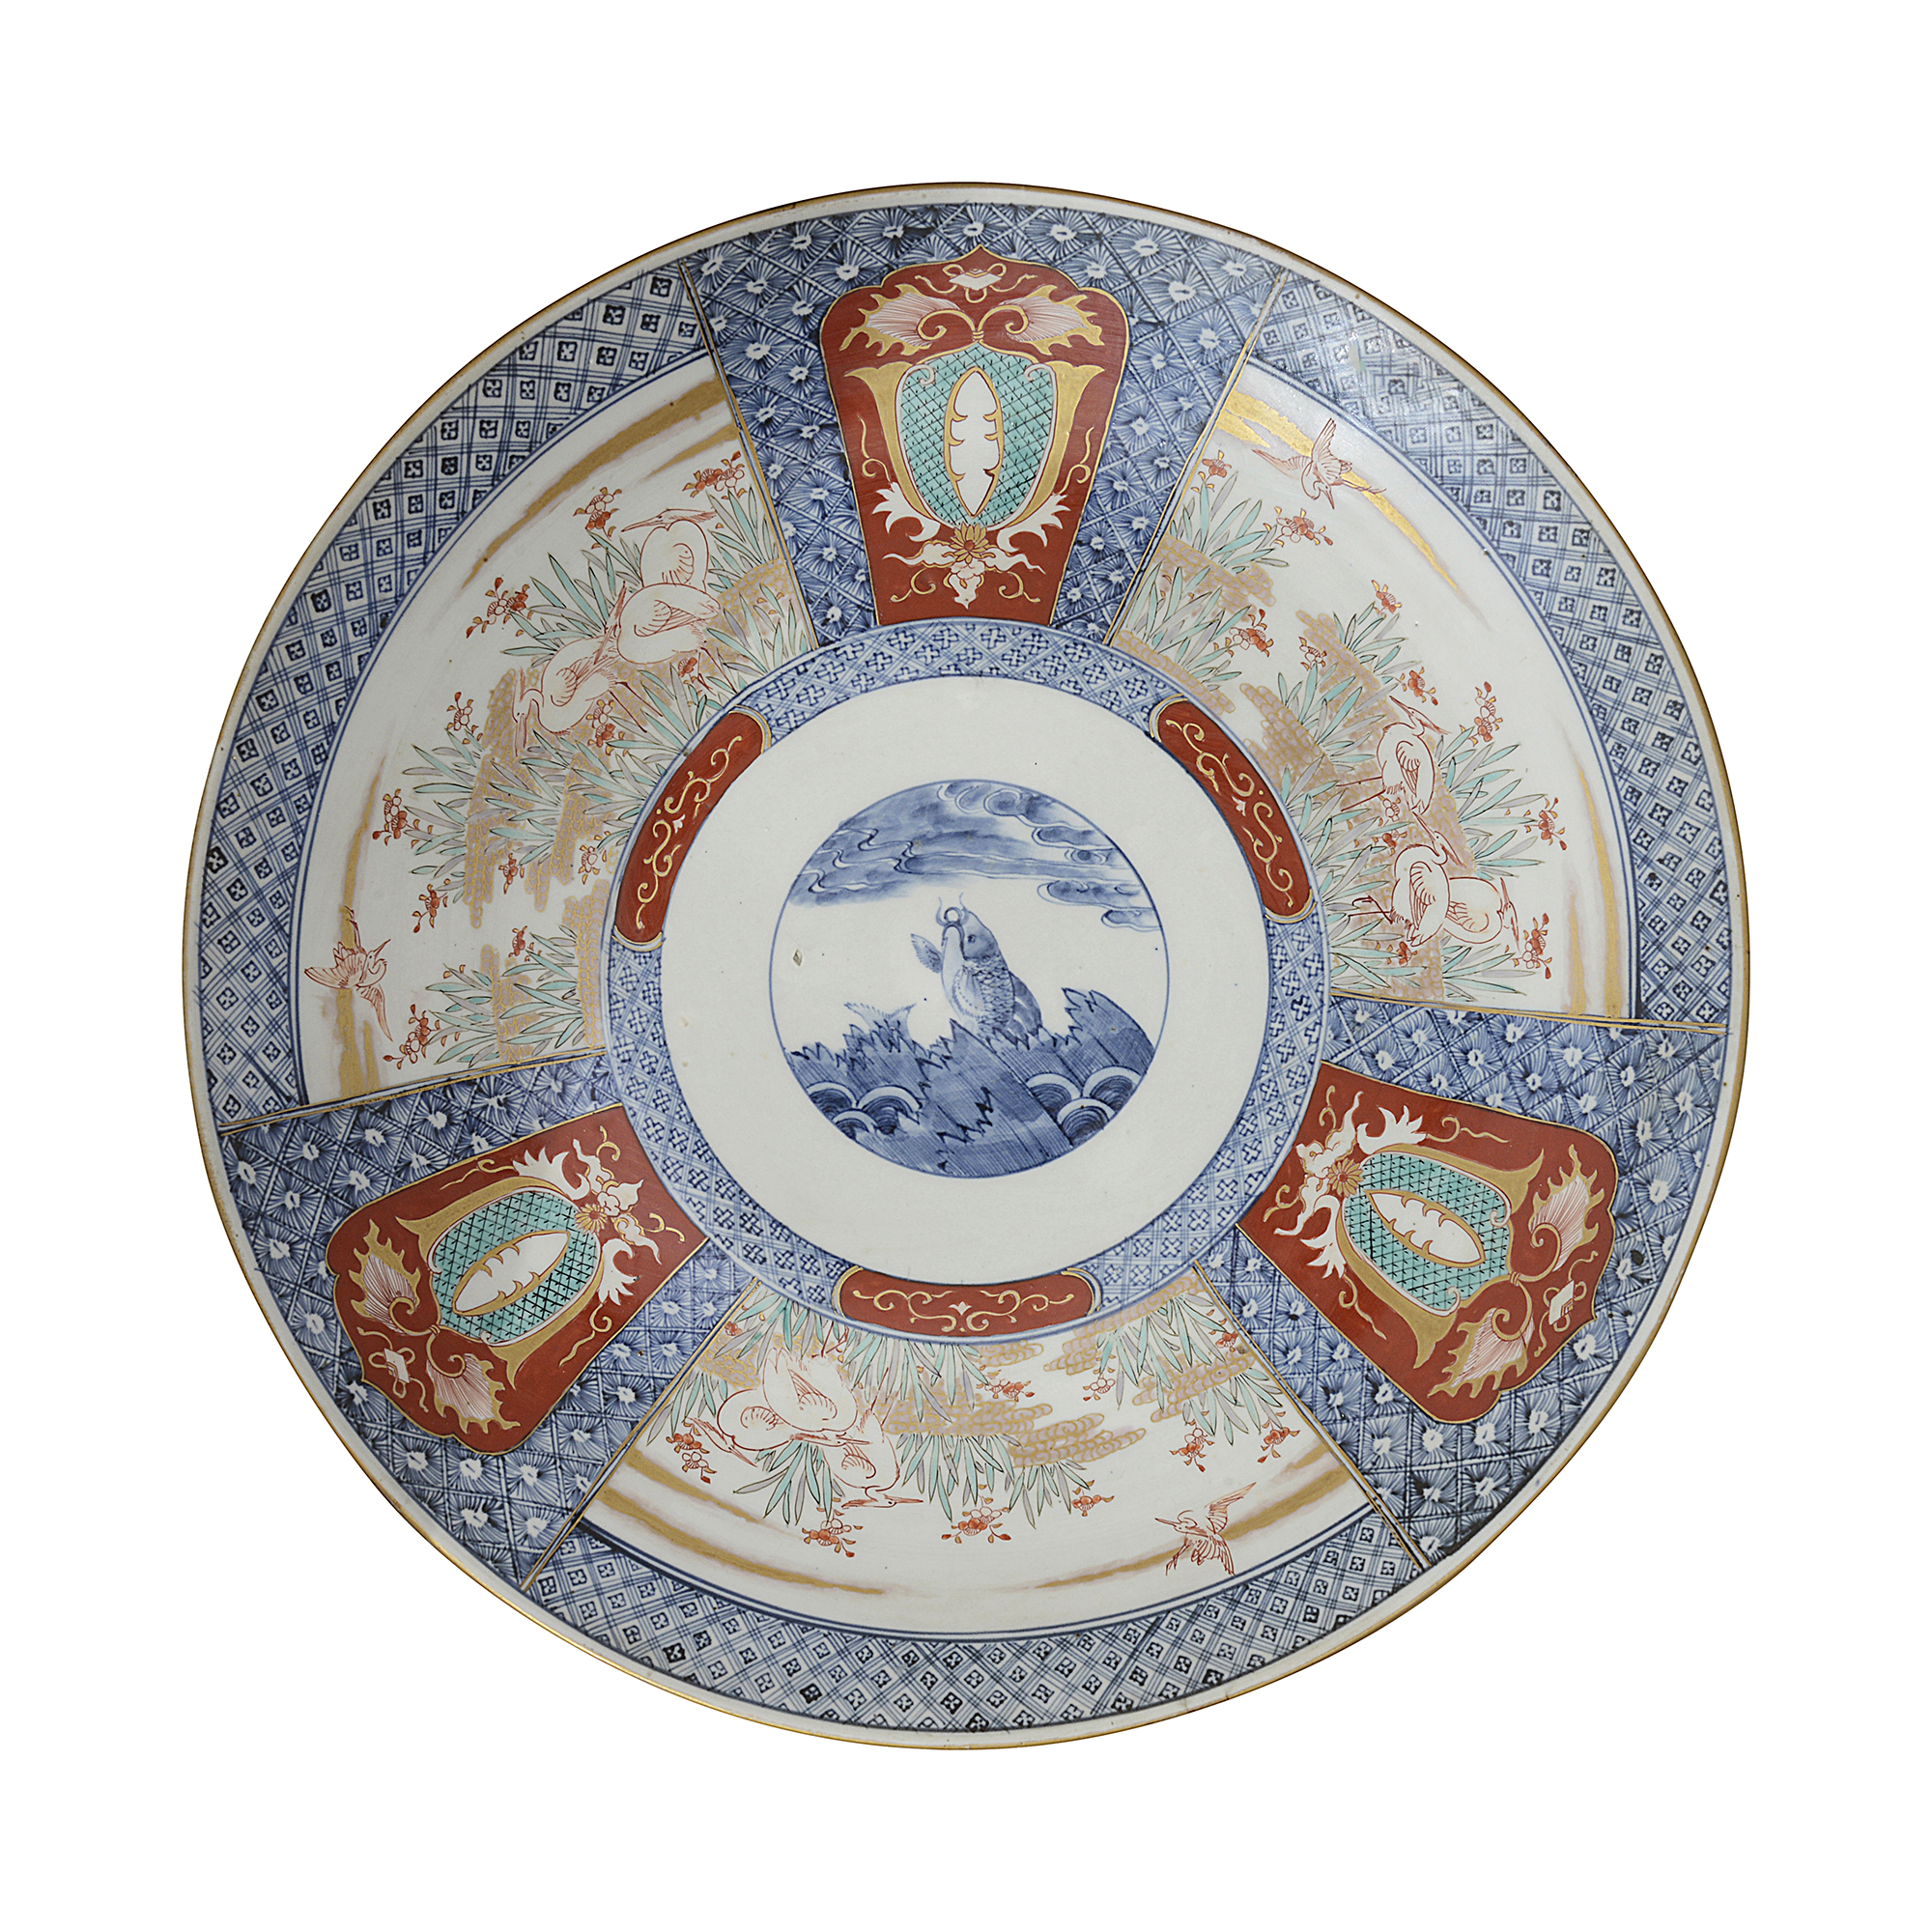 A large late 19th century Japanese Meiji period Imari charger